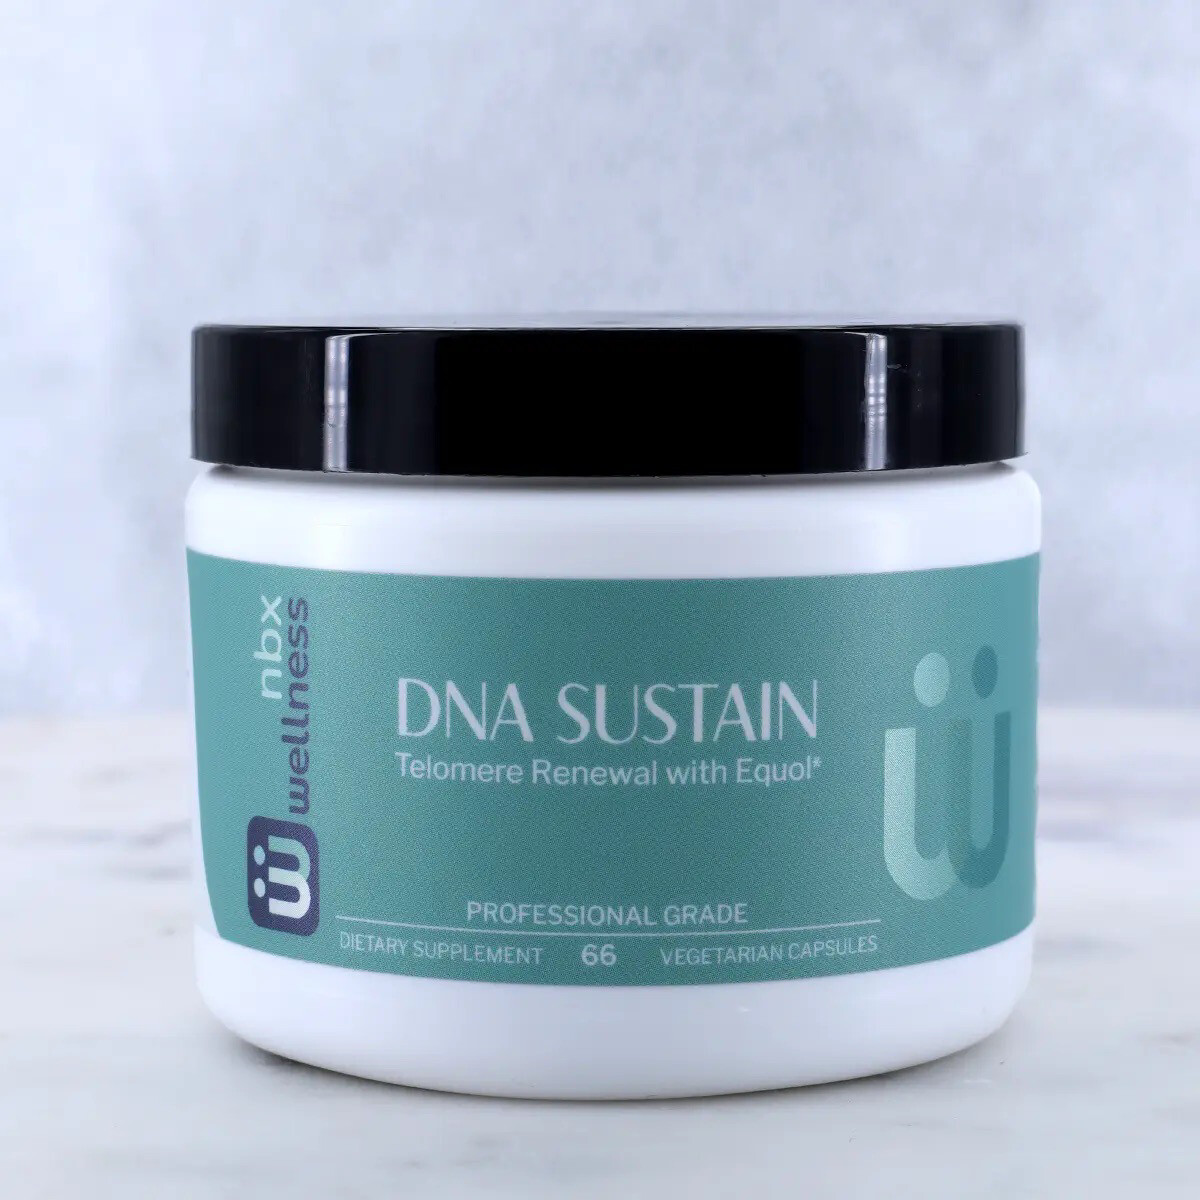 DNA Sustain Telomere Renewal with Equol